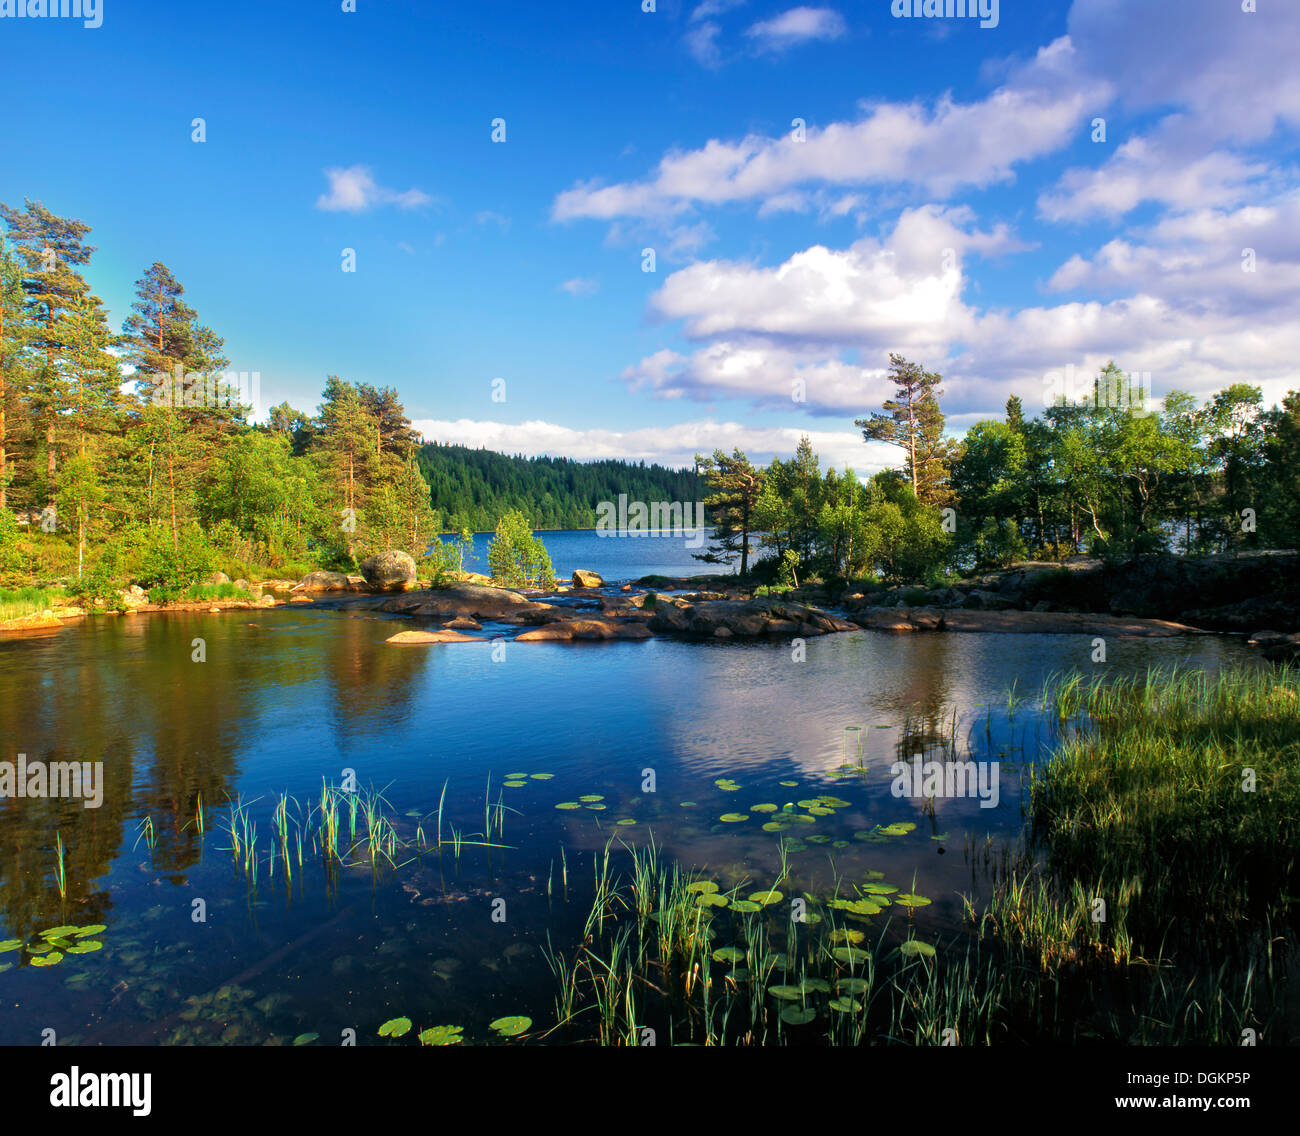 A view of a tranquil lake in southern Norway. Stock Photo